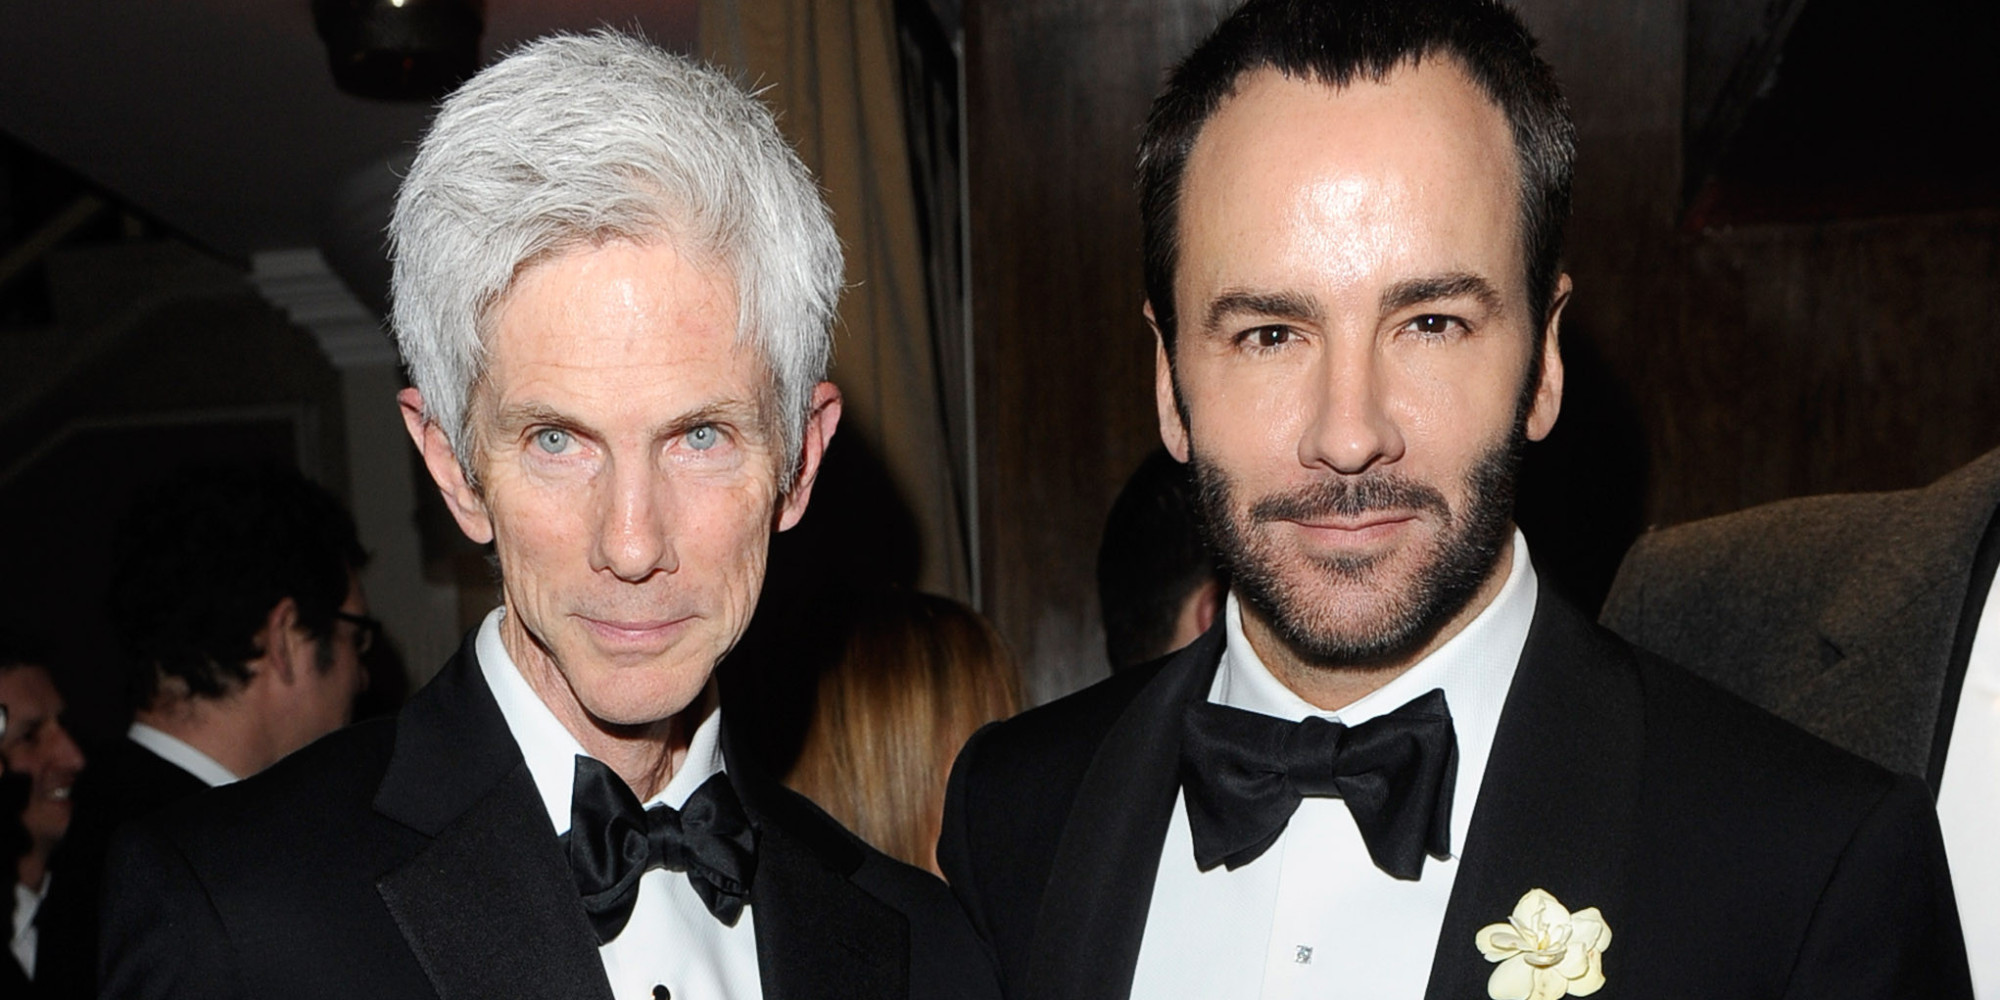 Richard buckley and tom ford relationship #2